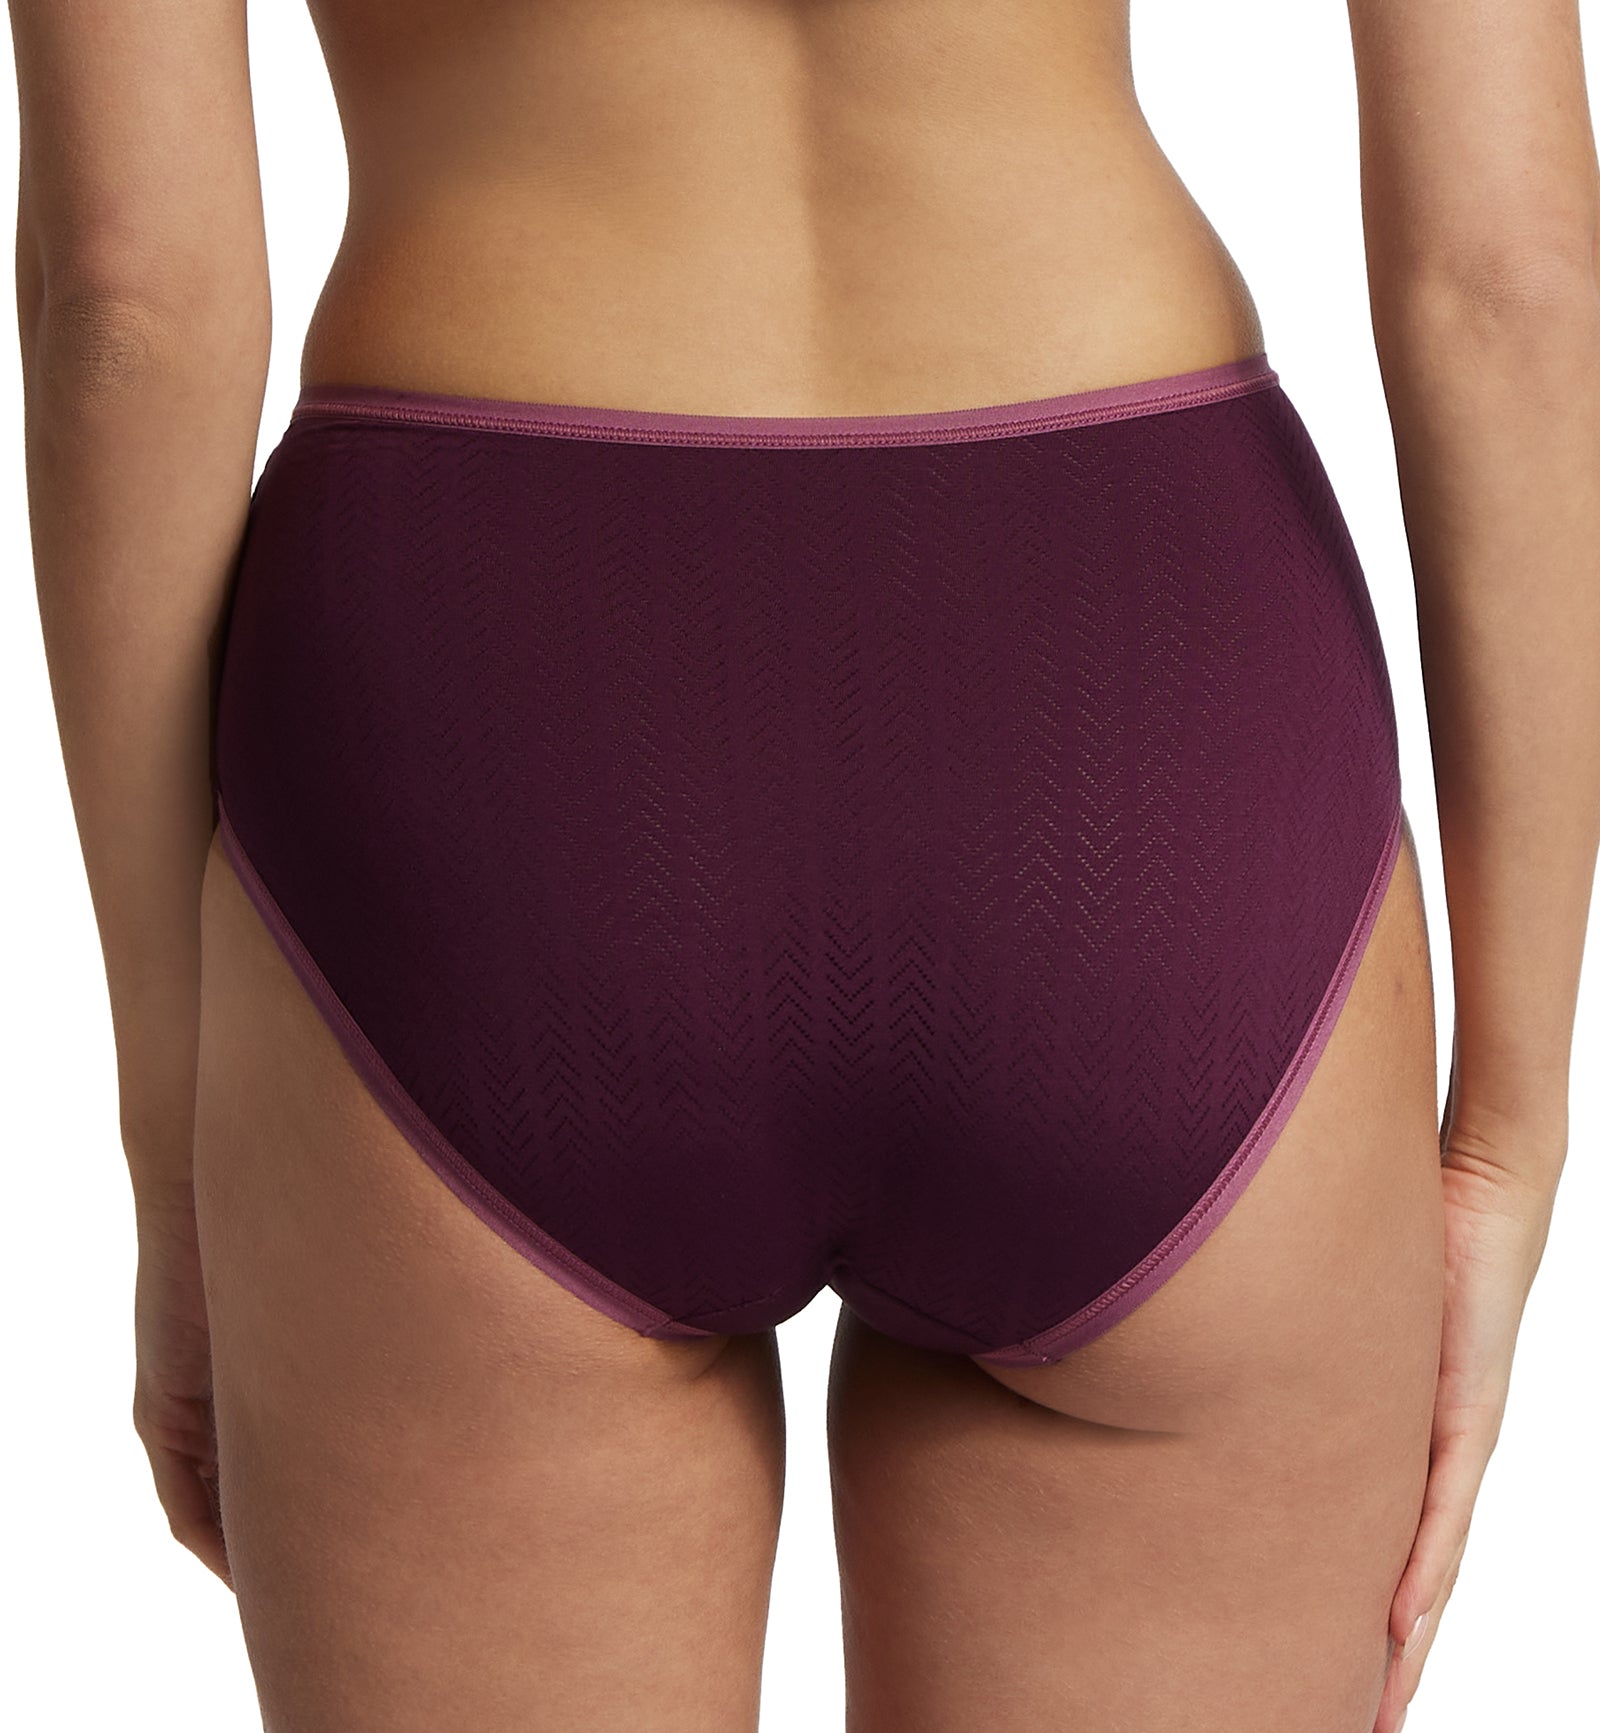 Hanky Panky MoveCalm High Waisted Brief (2P2264),XS,Dried Cherry/Damson Plum - Dried Cherry/Damson Plum,XS